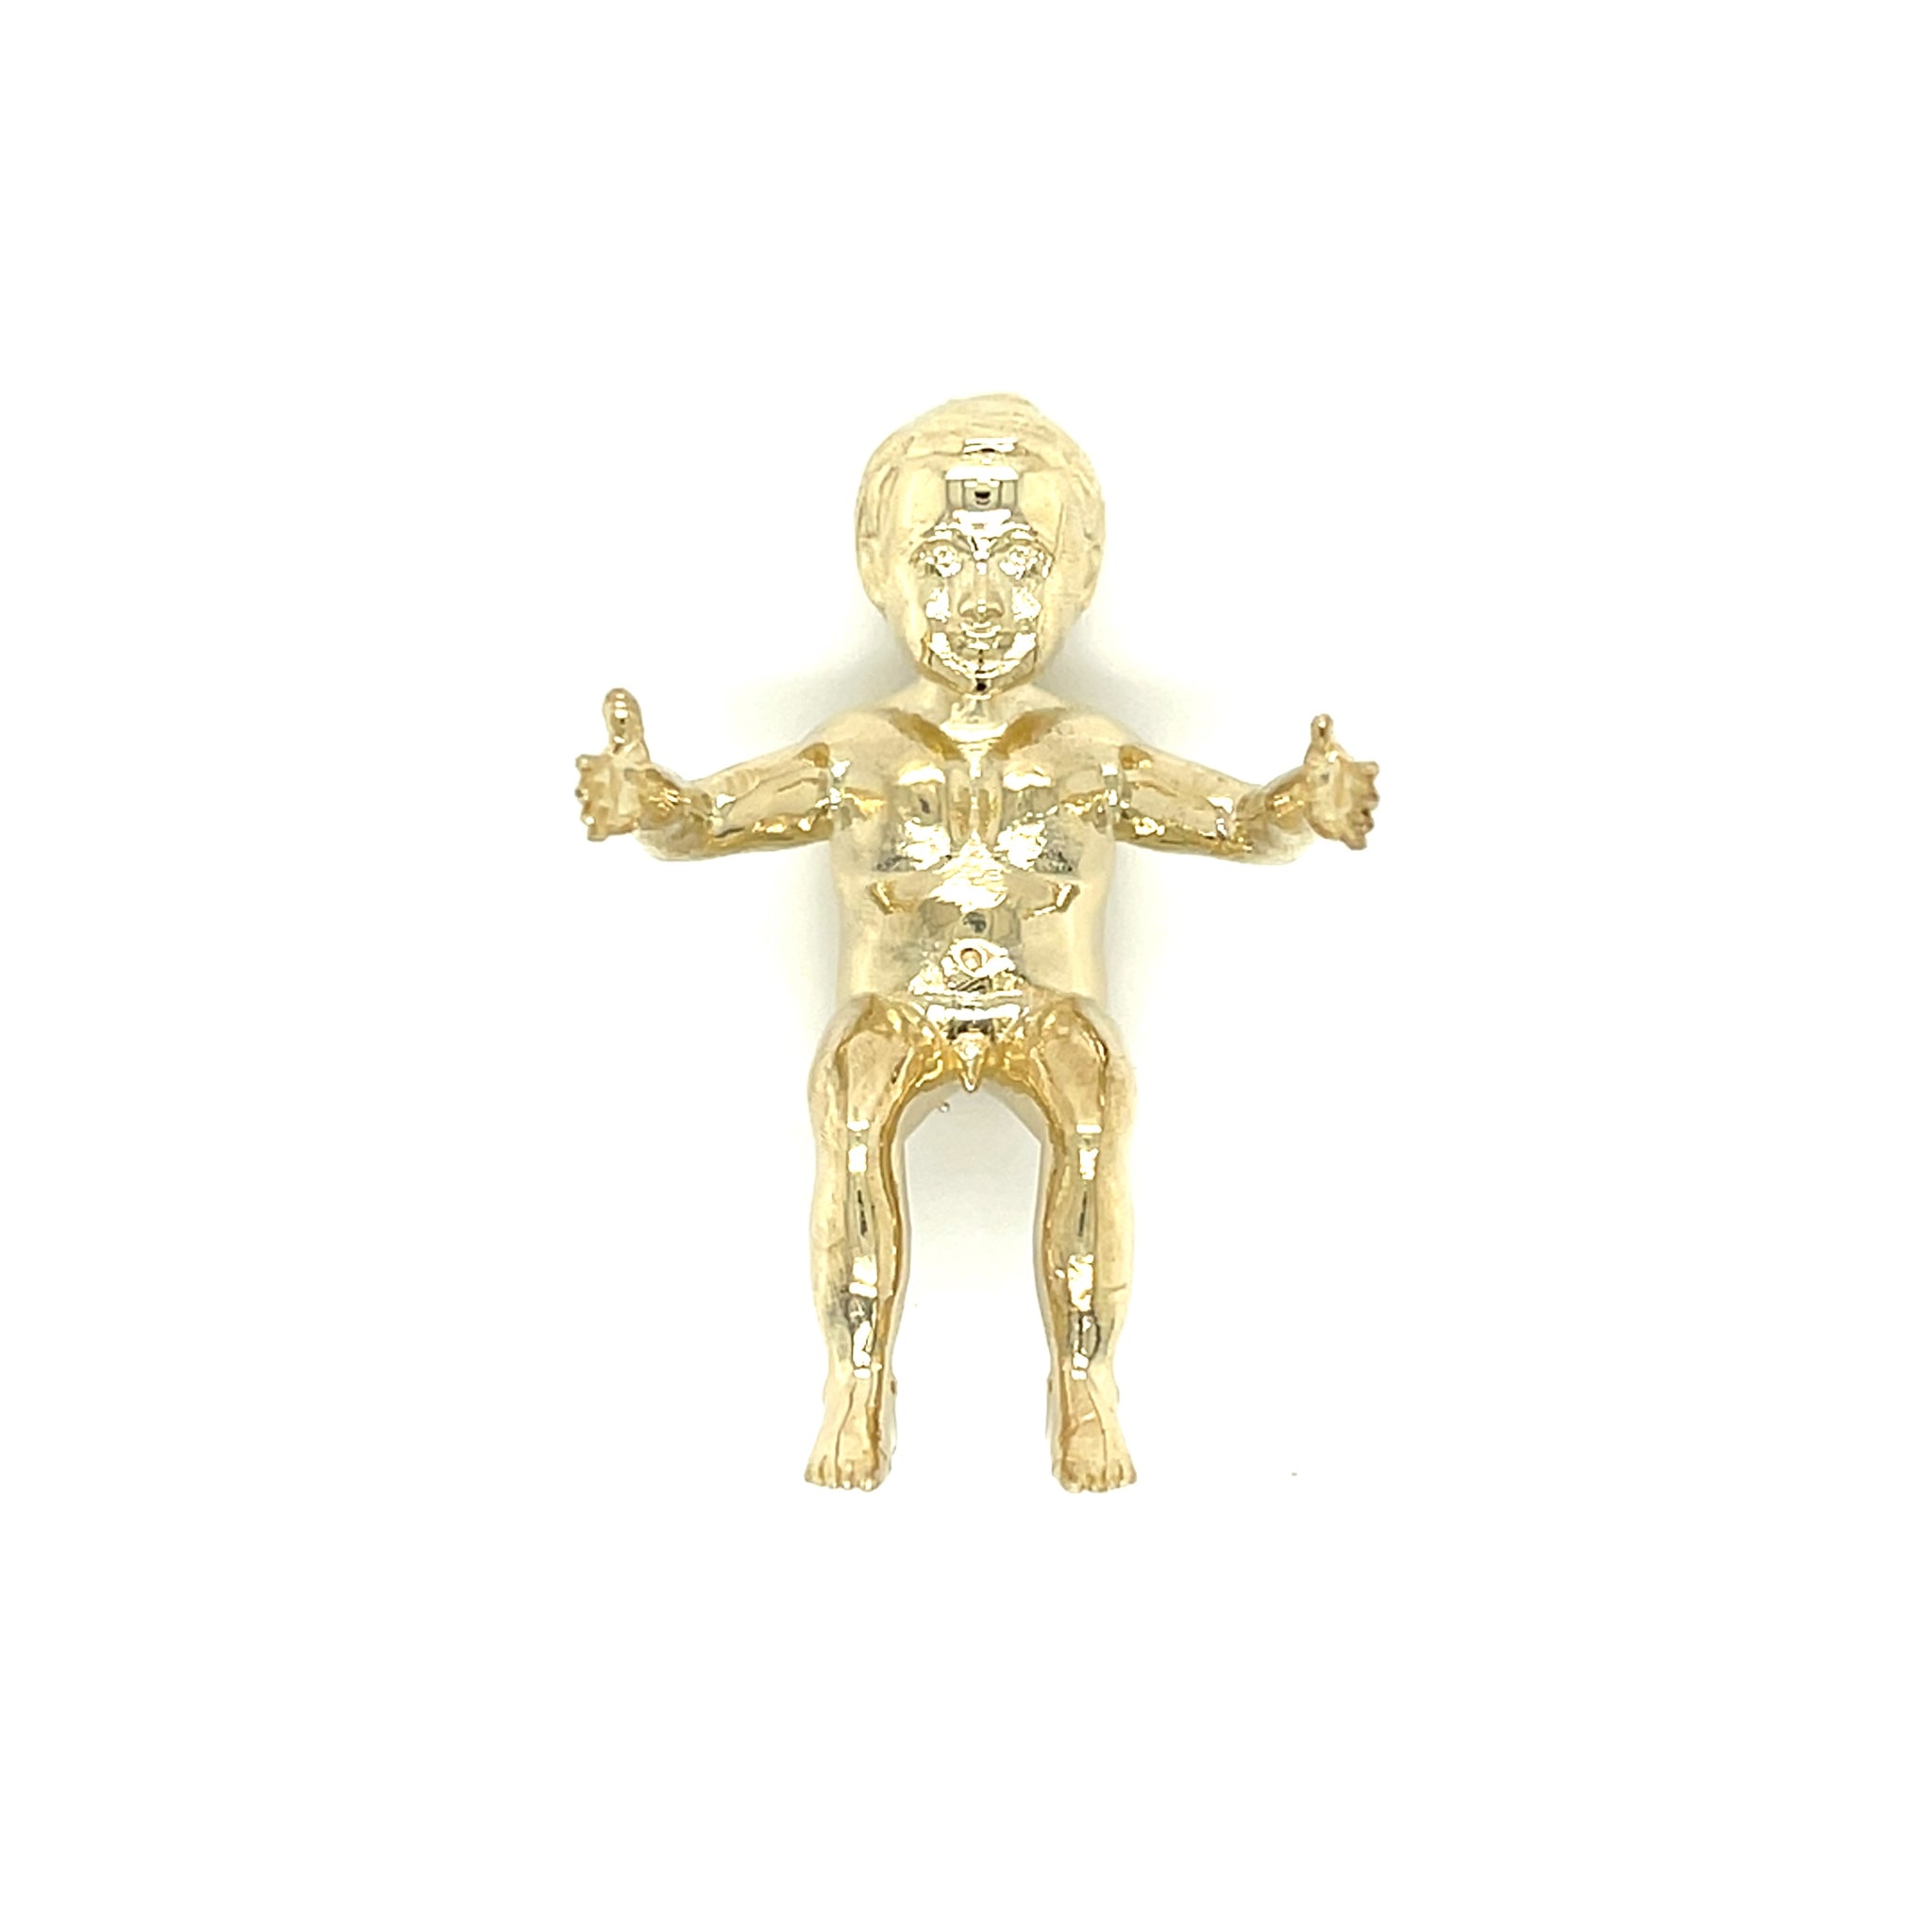 10k Yellow Gold Large Solid King Cake Baby